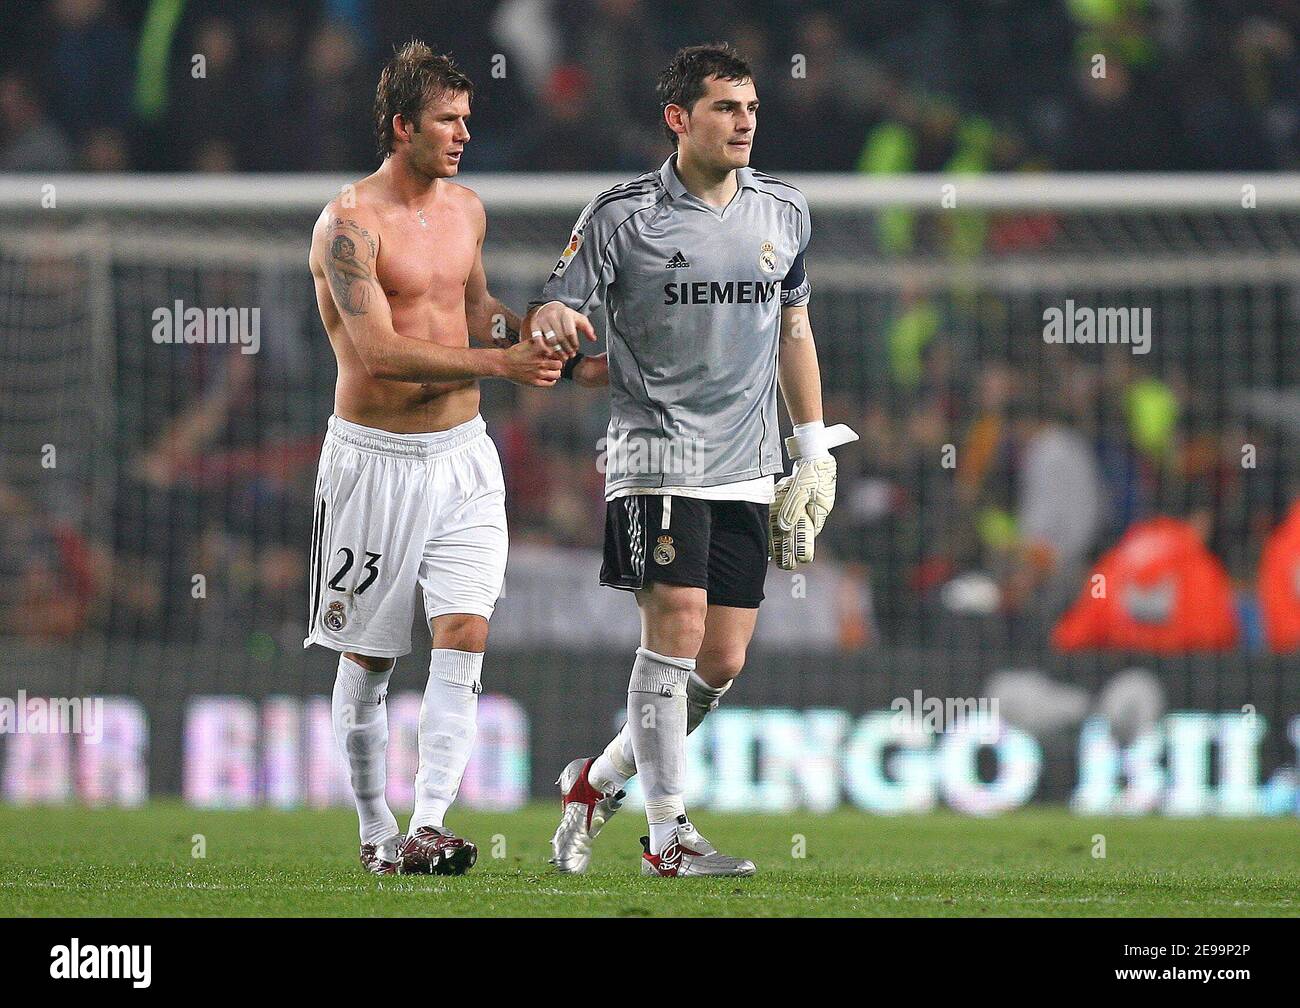 Real Madrid's David Beckham and Iker Casillas after the game during the Spanish primera league, FC Barcelona vs Real Madrid, at the Nou Camp Stadium, in Barcelona, Spain, on April 1, 2006. The game ended in a draw 1-1. Photo by Christian Liewig/ABACAPRESS.COM Stock Photo